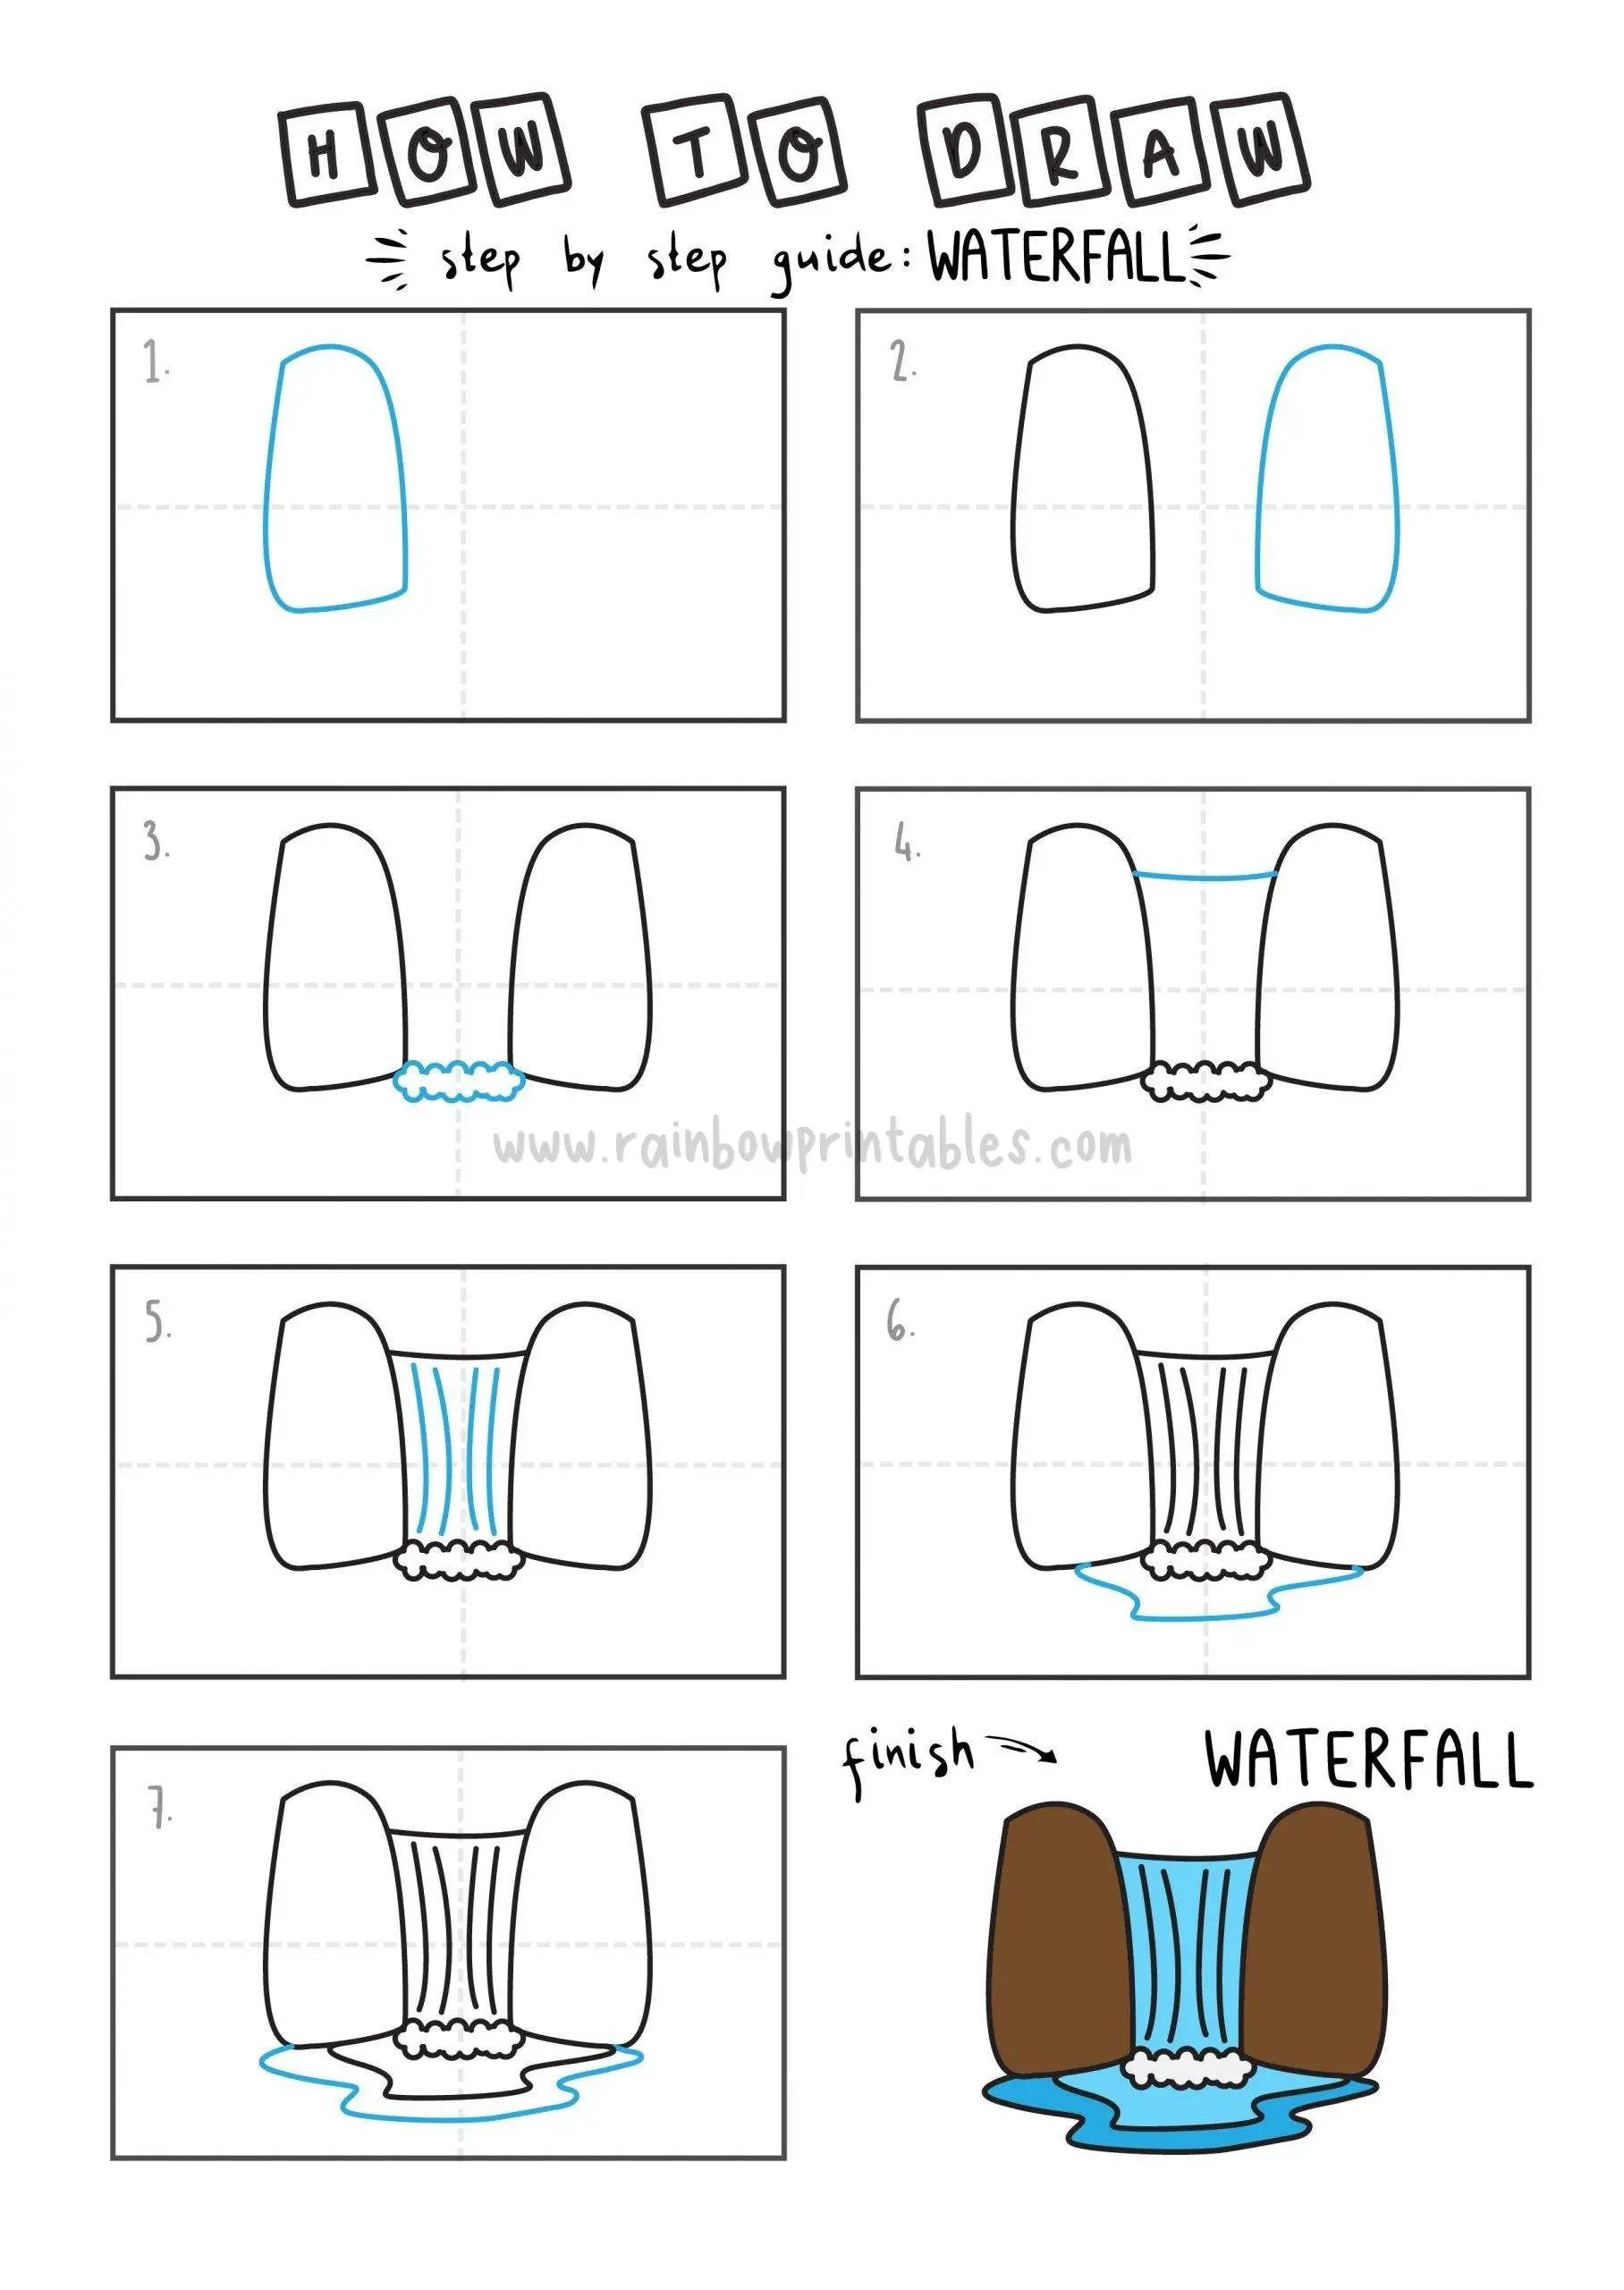 How To Draw Tutorials For Kids Waterfall Step by step for kids easy simple guide Sceneary scaled